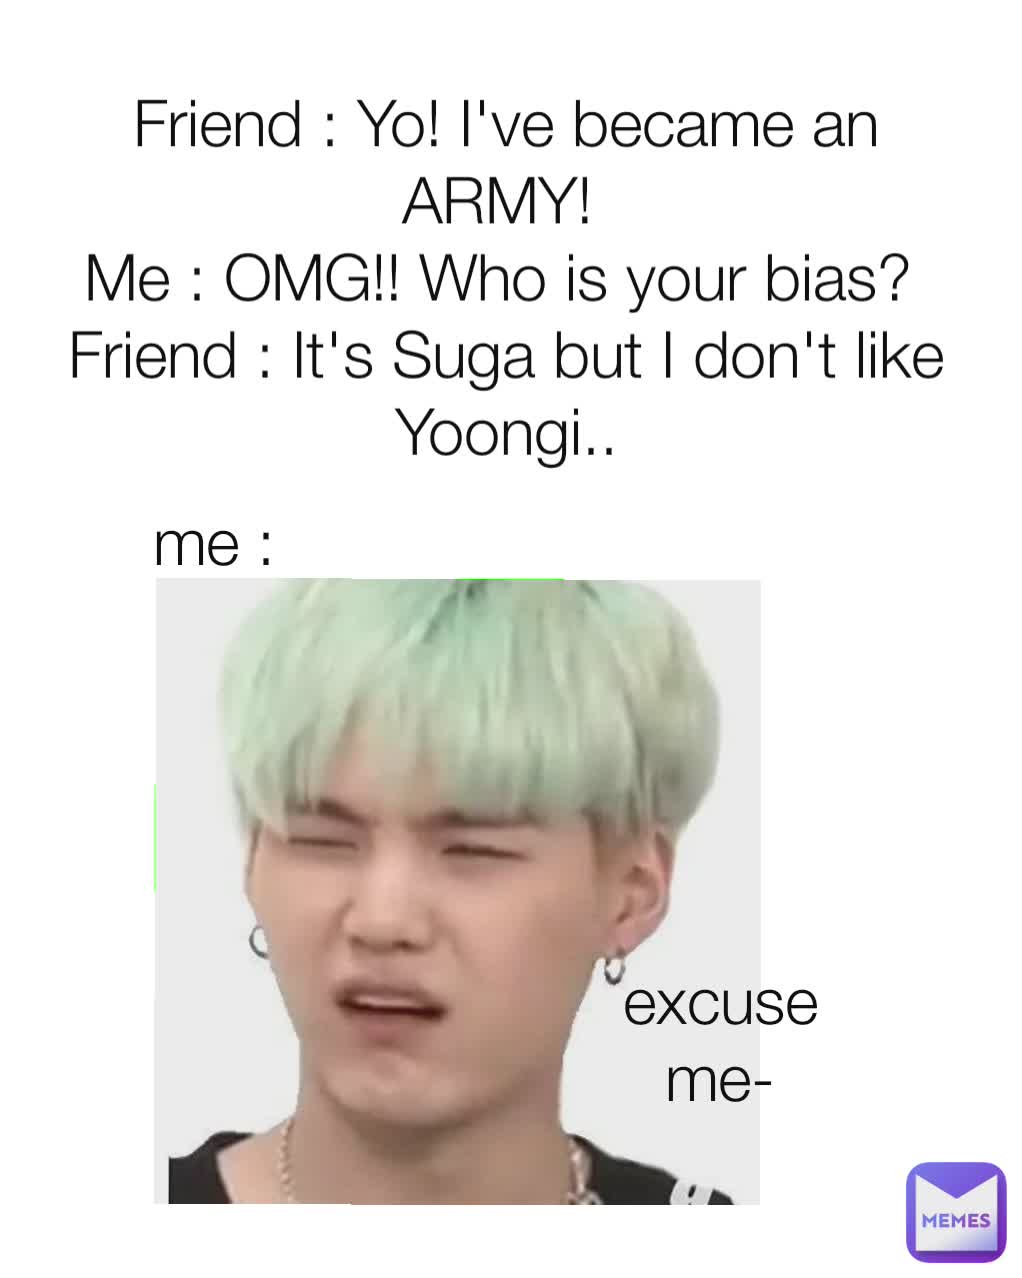 Friend : Yo! I've became an ARMY! 
Me : OMG!! Who is your bias? 
Friend : It's Suga but I don't like Yoongi..
  me : excuse me-